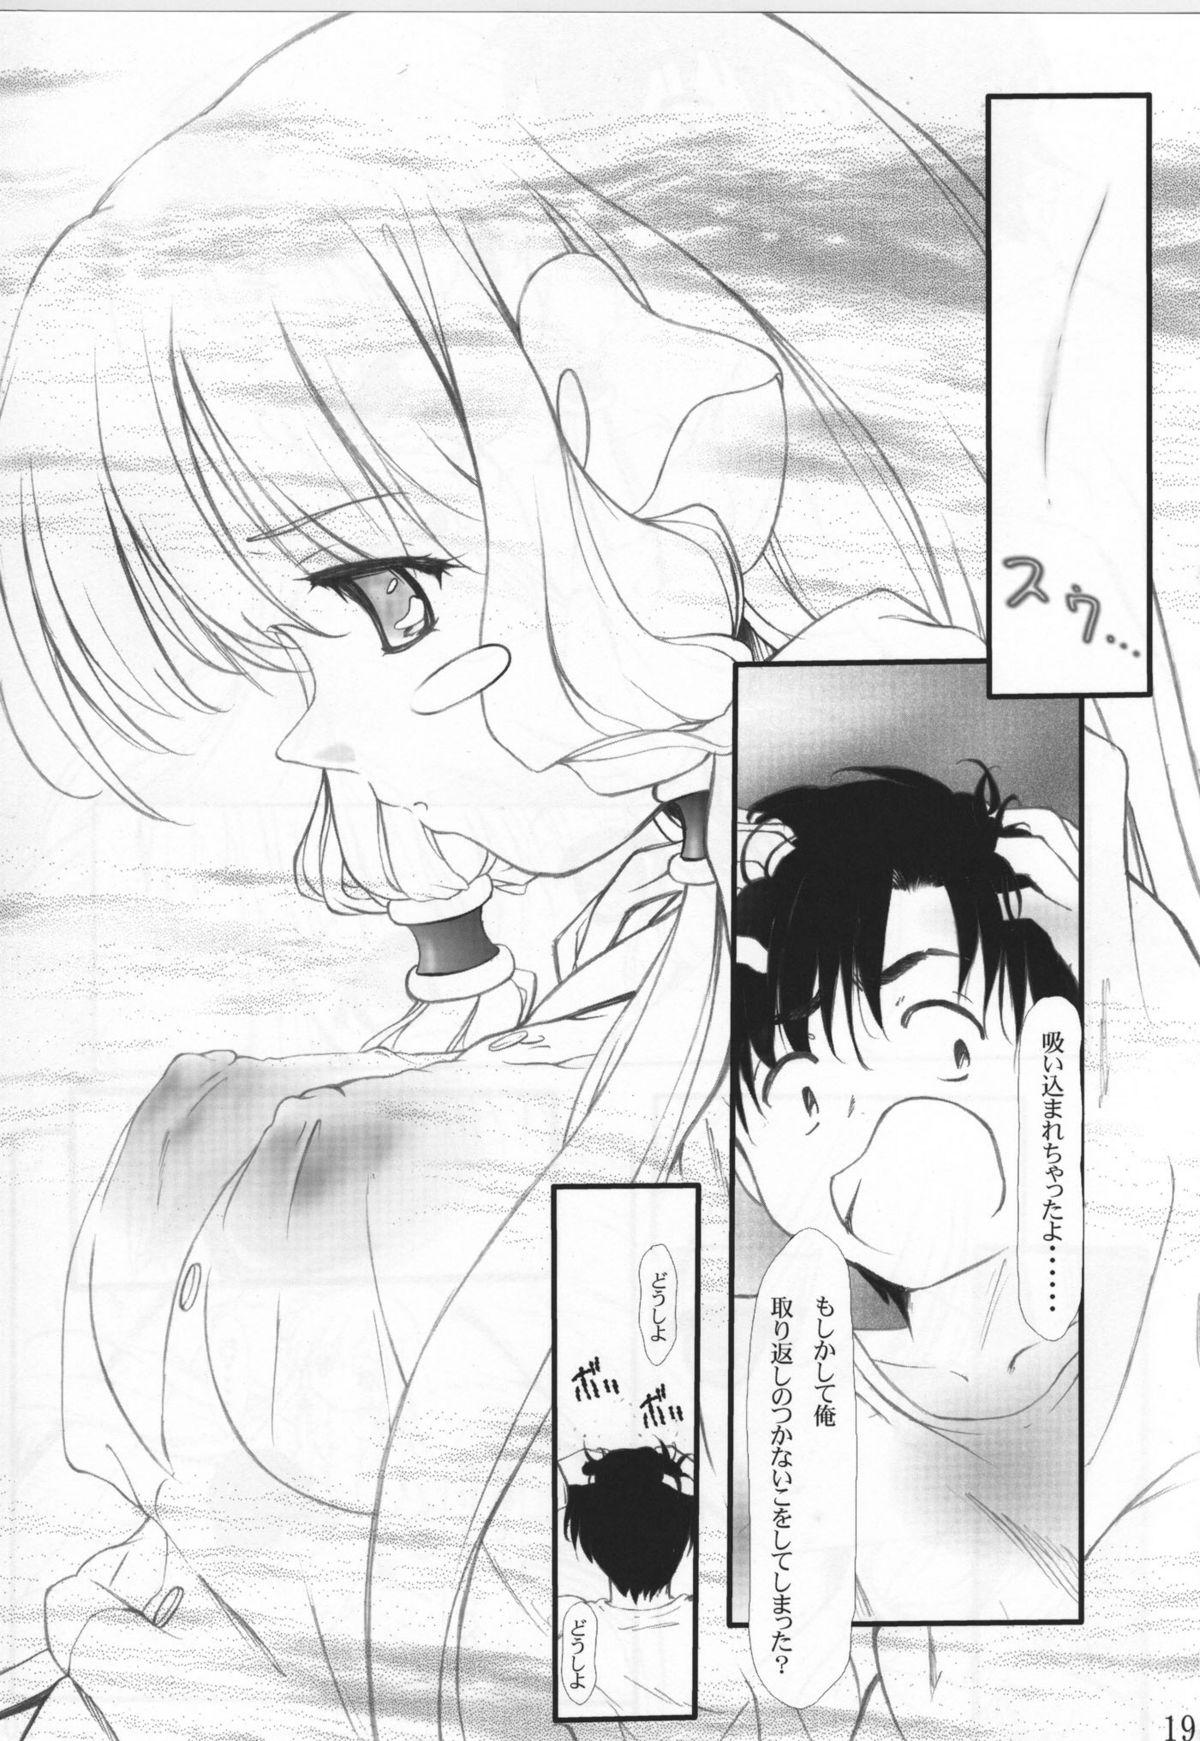 Camgirl From instinct - Chobits Gozada - Page 12